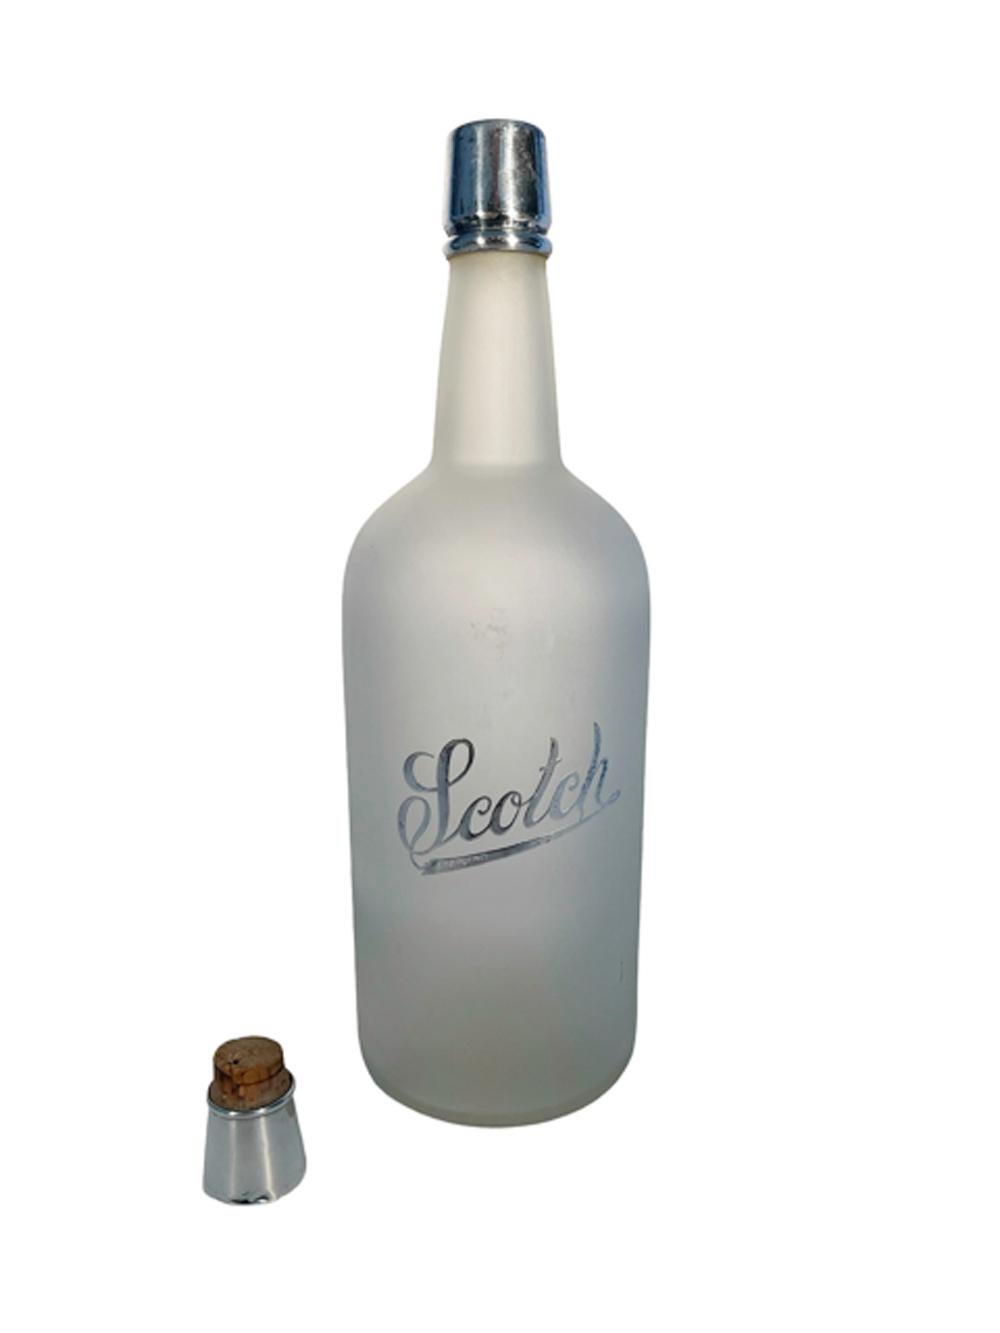 Art Deco back bar bottle or decanter with silver overlay on a frosted ground. Silver over lay collar and the word 